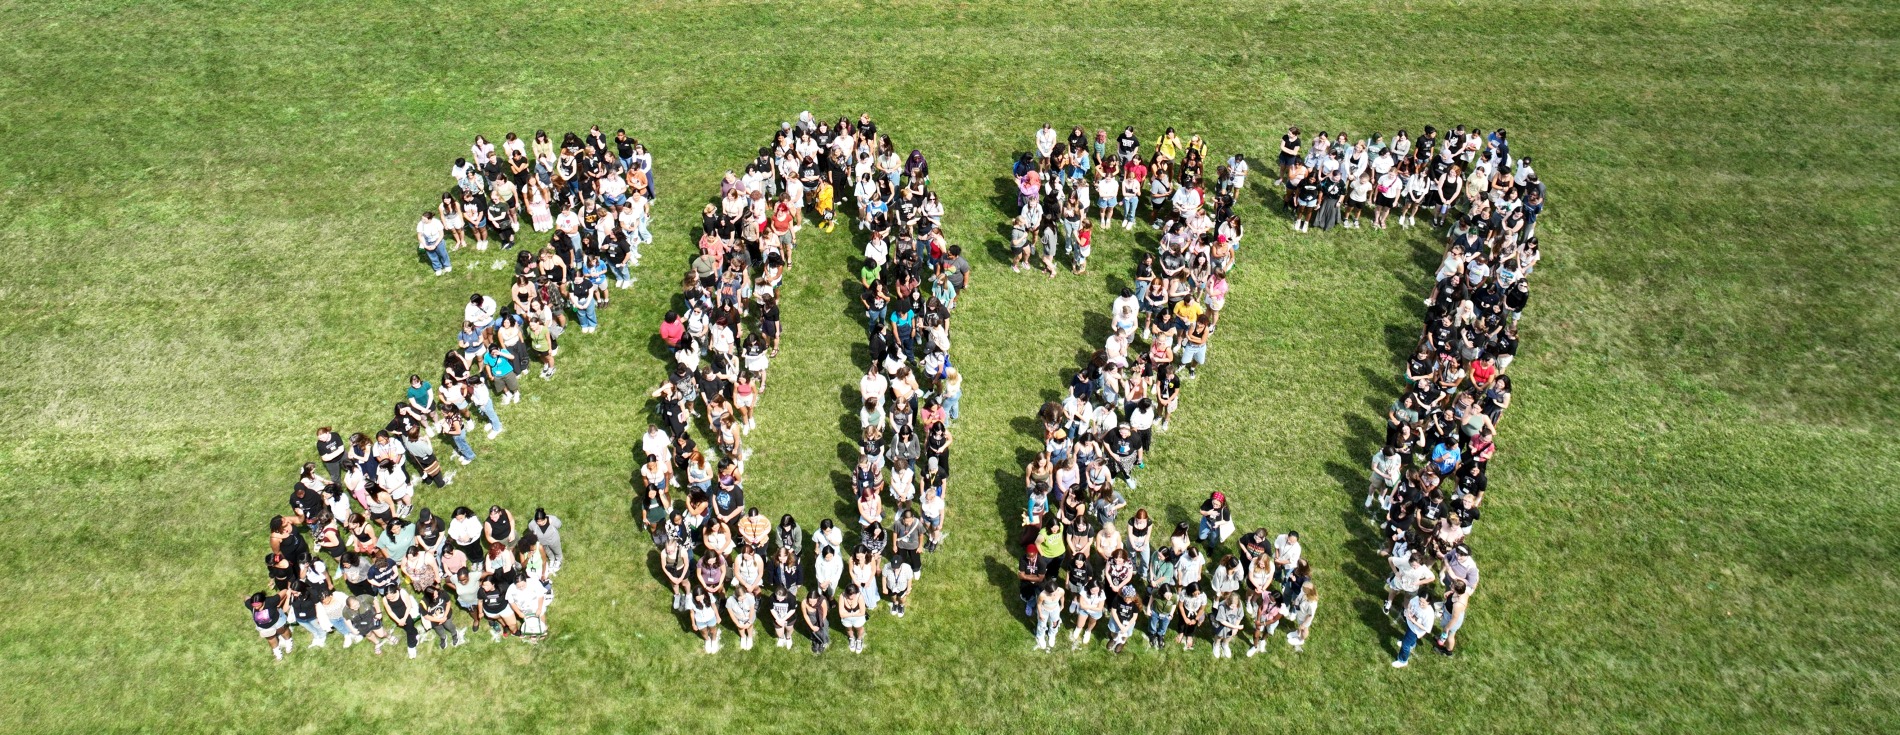 drone-shot-of-people-forming-2027